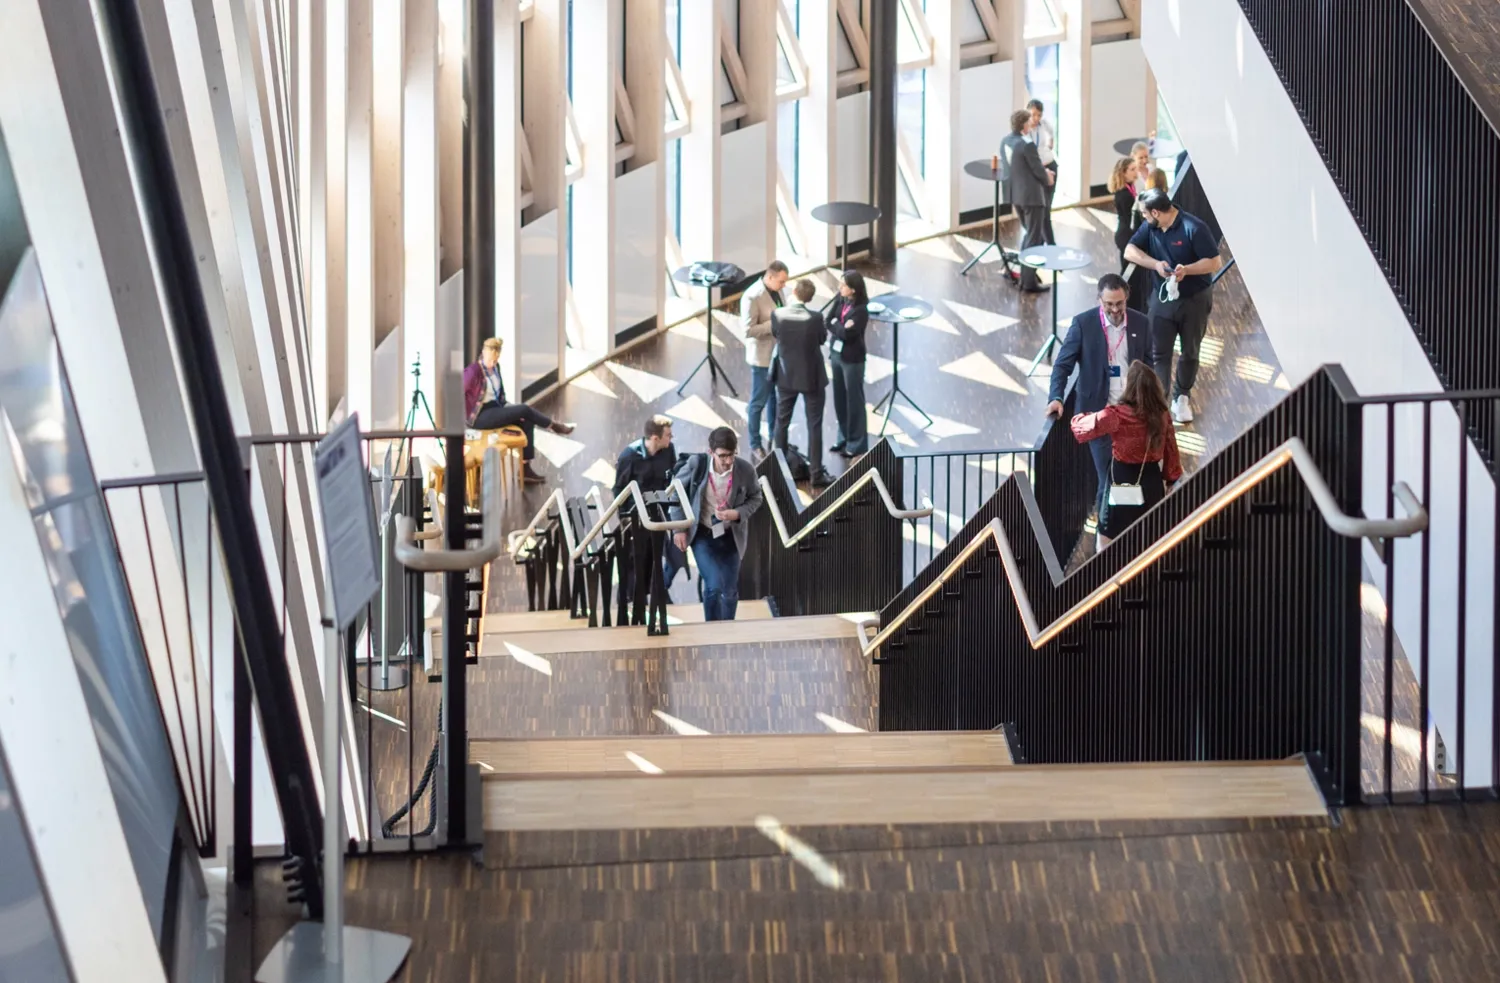 People walking in the stairs inside the aula medica.